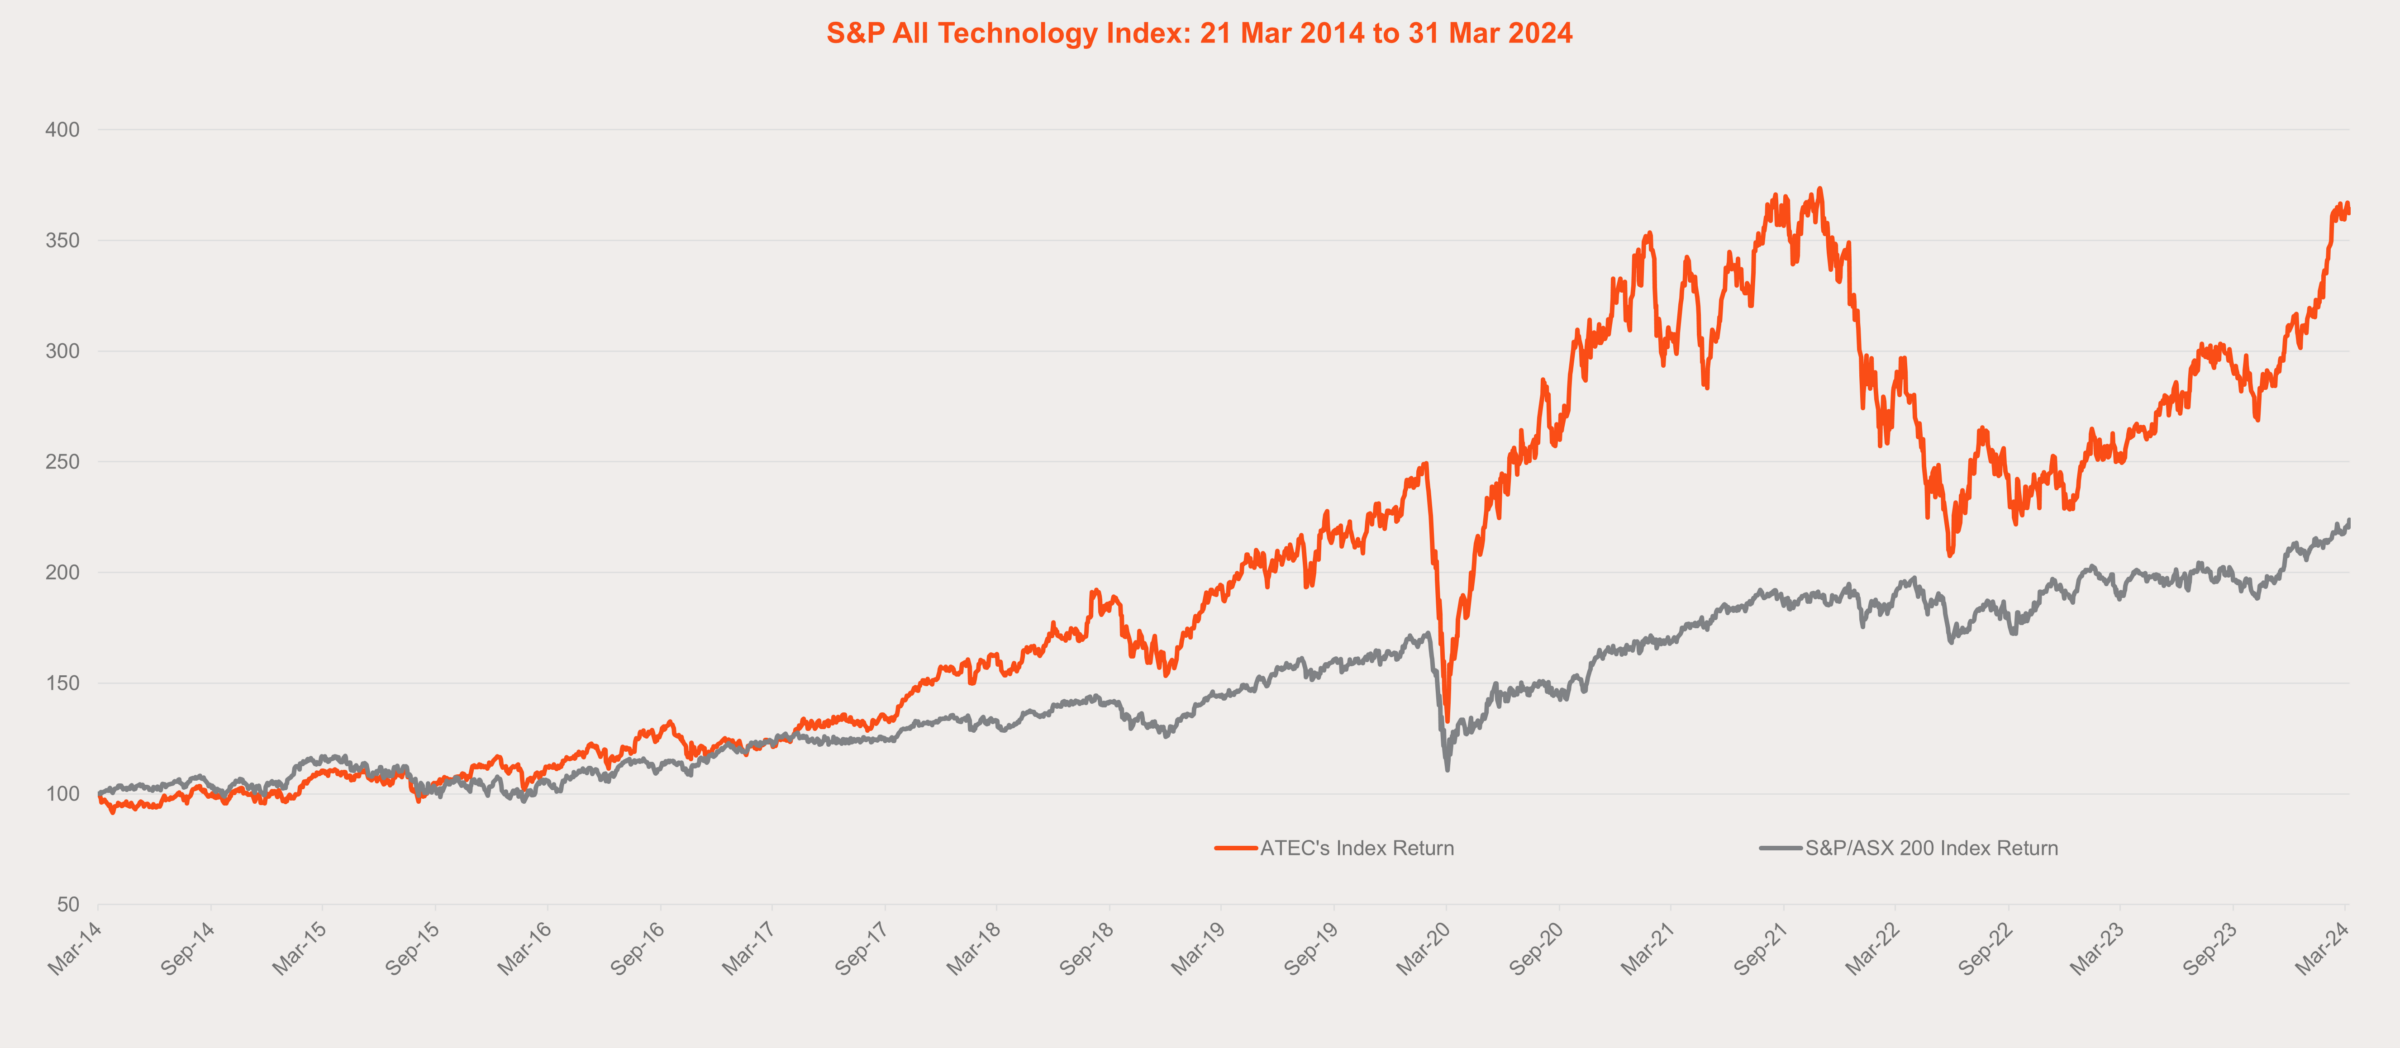 Source: Betashares, Bloomberg. Since common inception. ATEC’s index inception date is 21 March 2014. Chart shows performance of the S&P All Technology Index and does not take into account ATEC’s management fees of 0.48% p.a. Past performance is not an indicator of future performance. You cannot invest directly in an index.